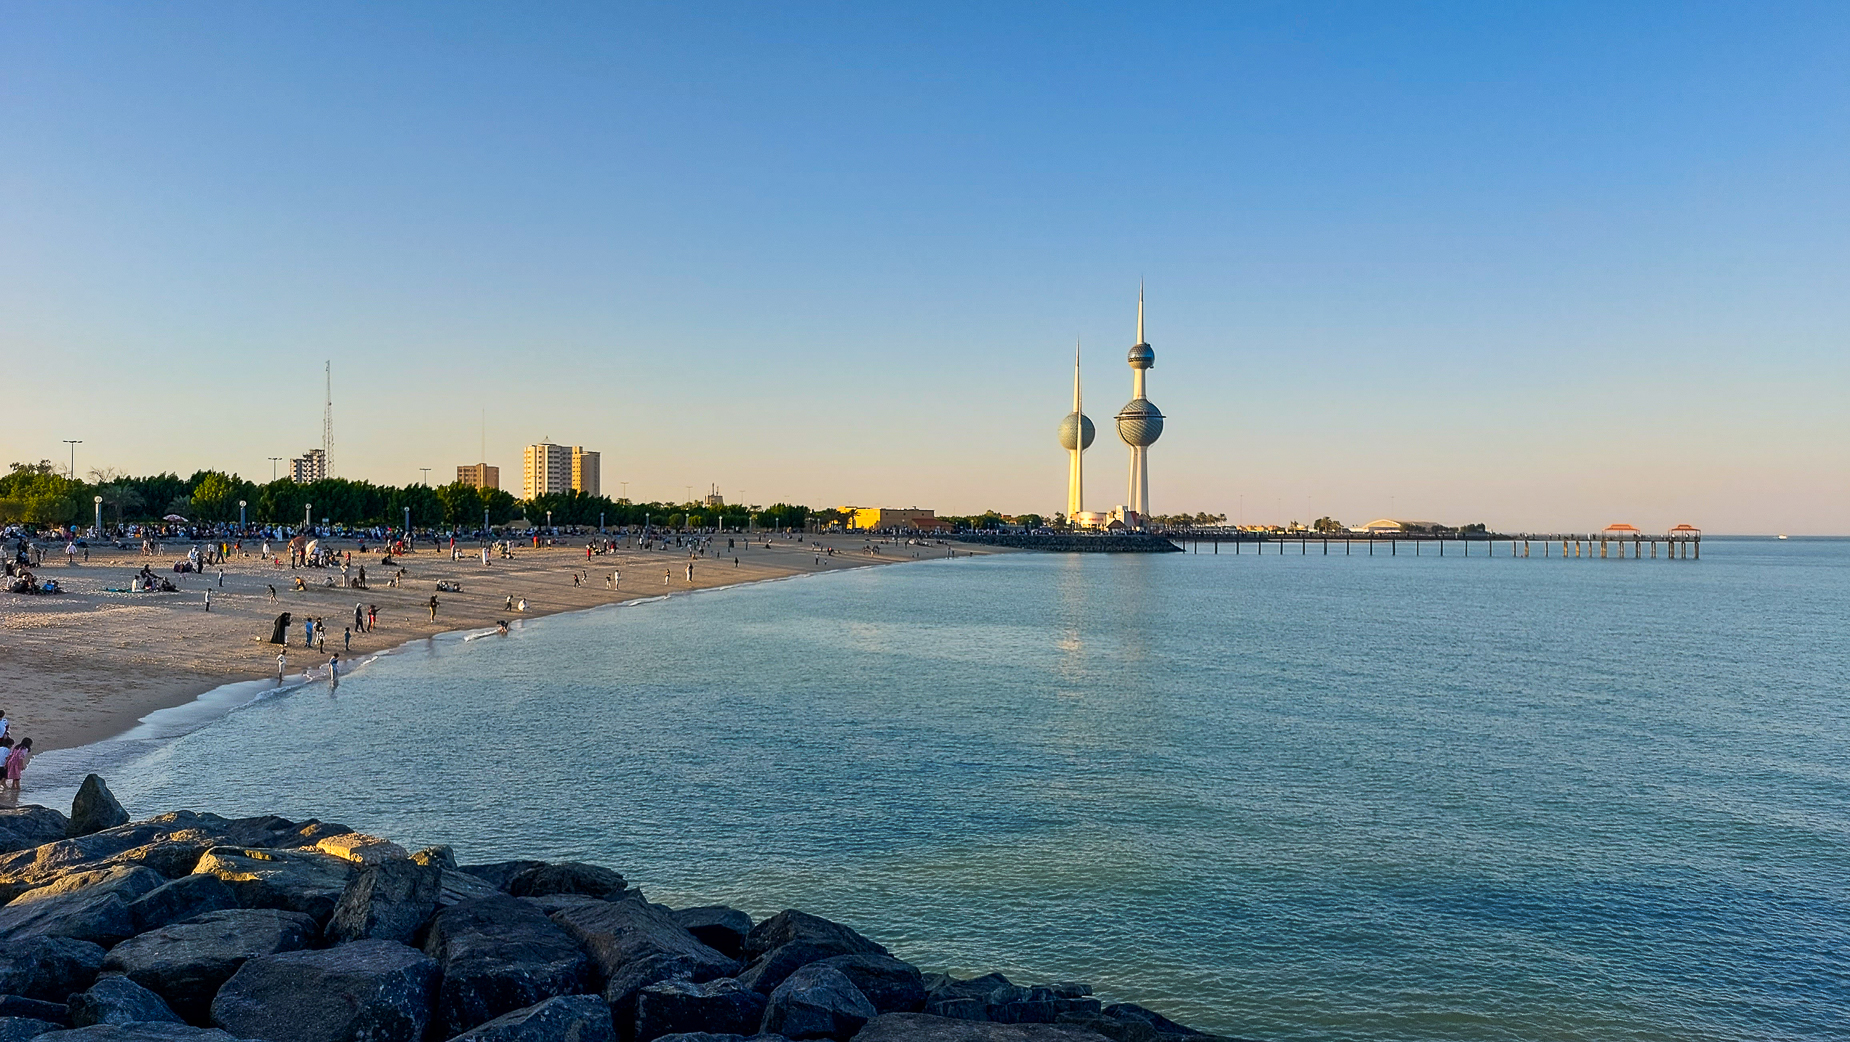 <span  class="uc_style_uc_tiles_grid_image_elementor_uc_items_attribute_title" style="color:#ffffff;">Beach area of Kuwait City</span>